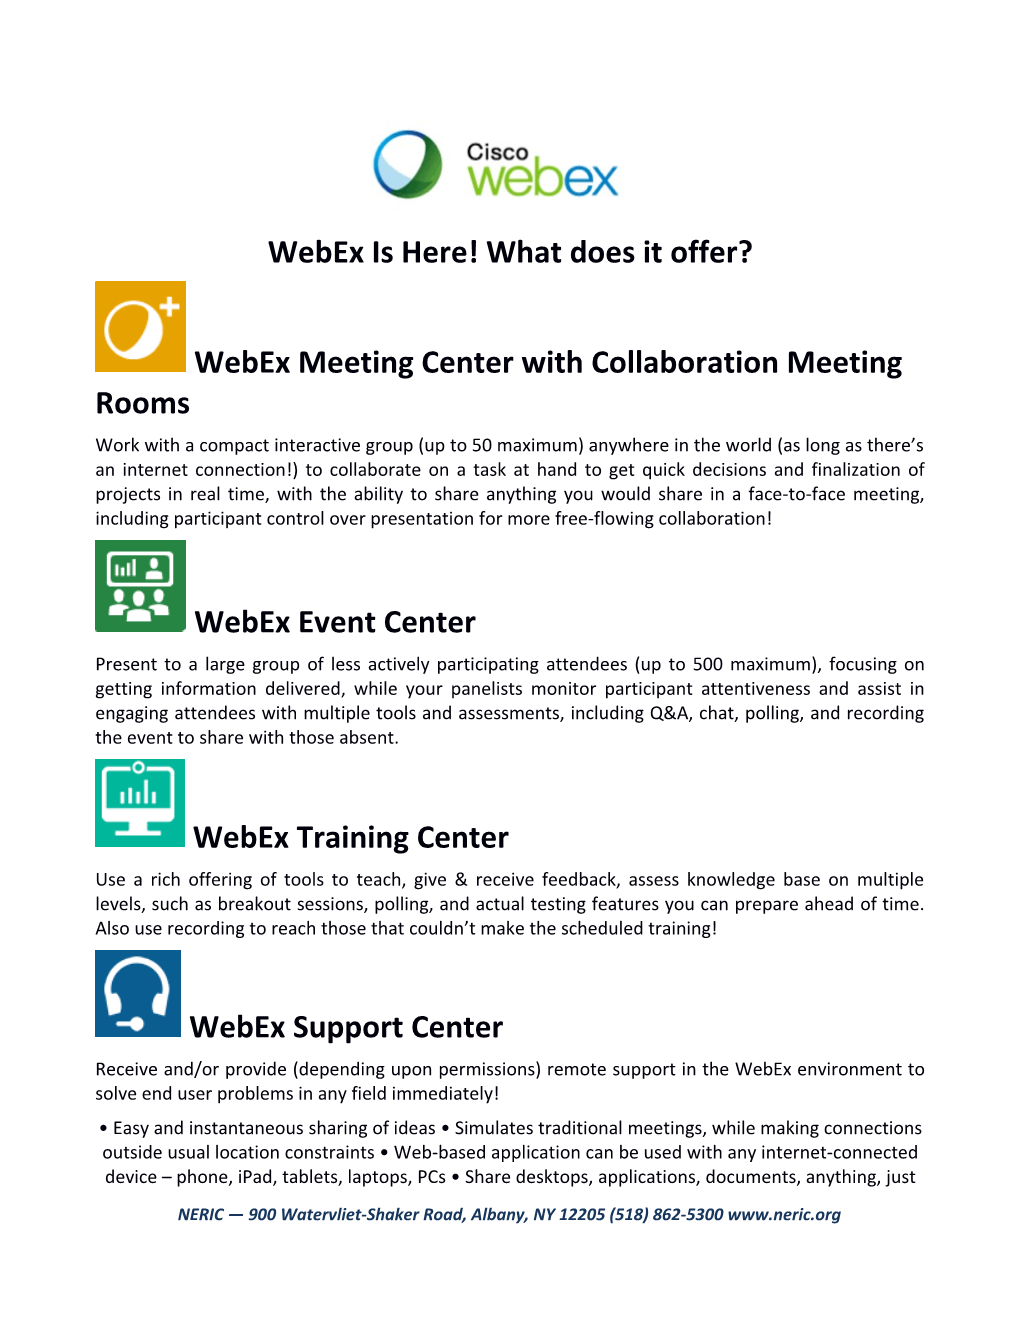 Webex Is Here! What Does It Offer?